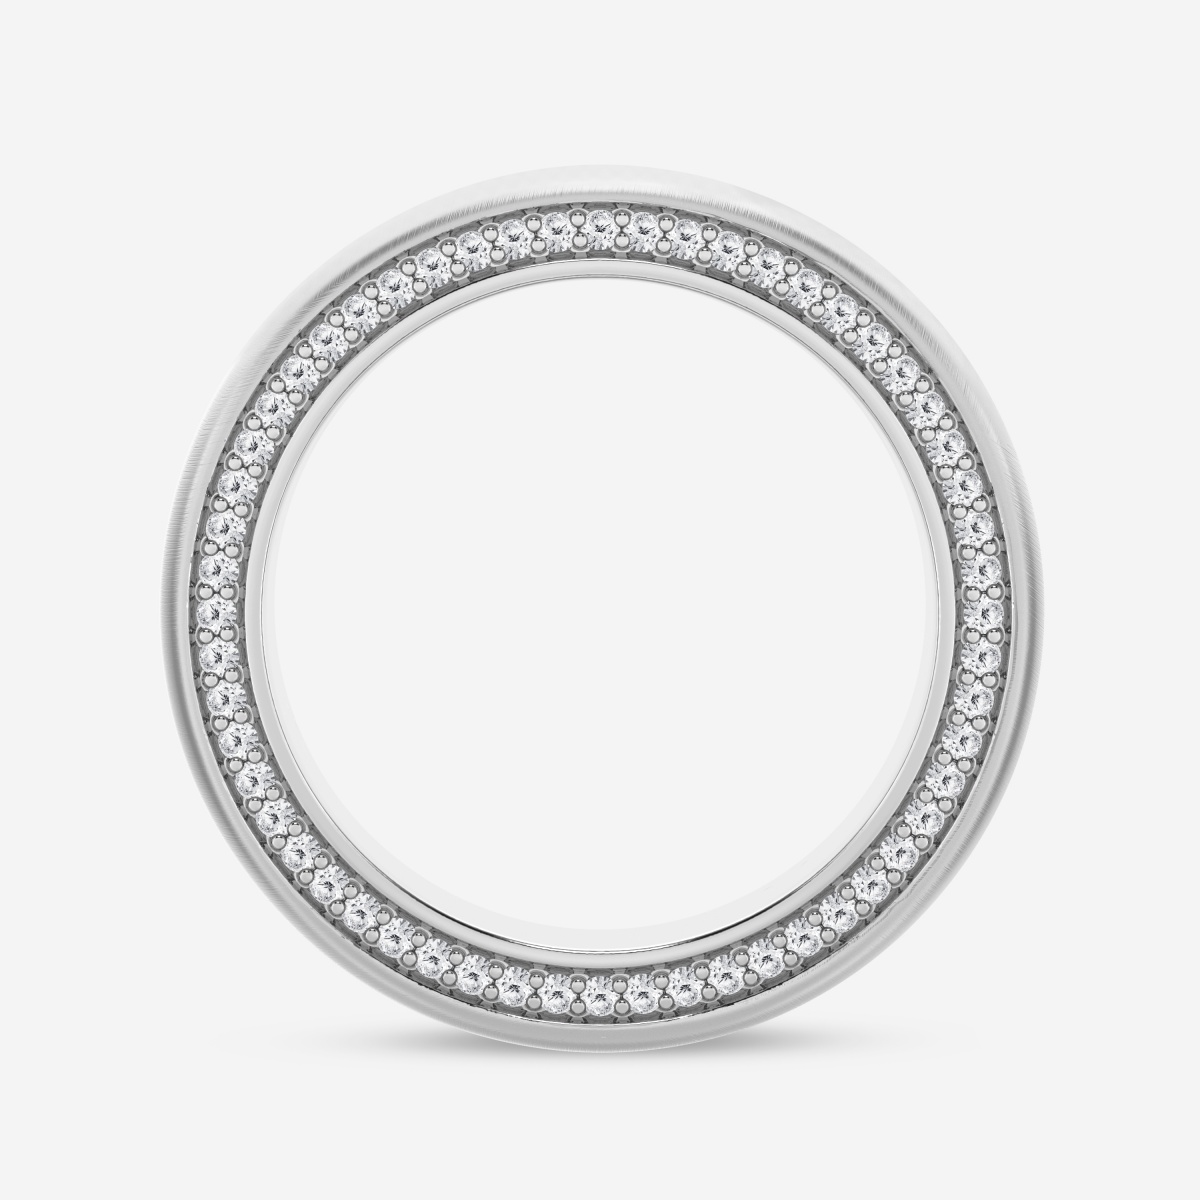 Additional Image 1 for  2/3 ctw Round Lab Grown Diamond 7mm Domed Satin Finish Eternity Band